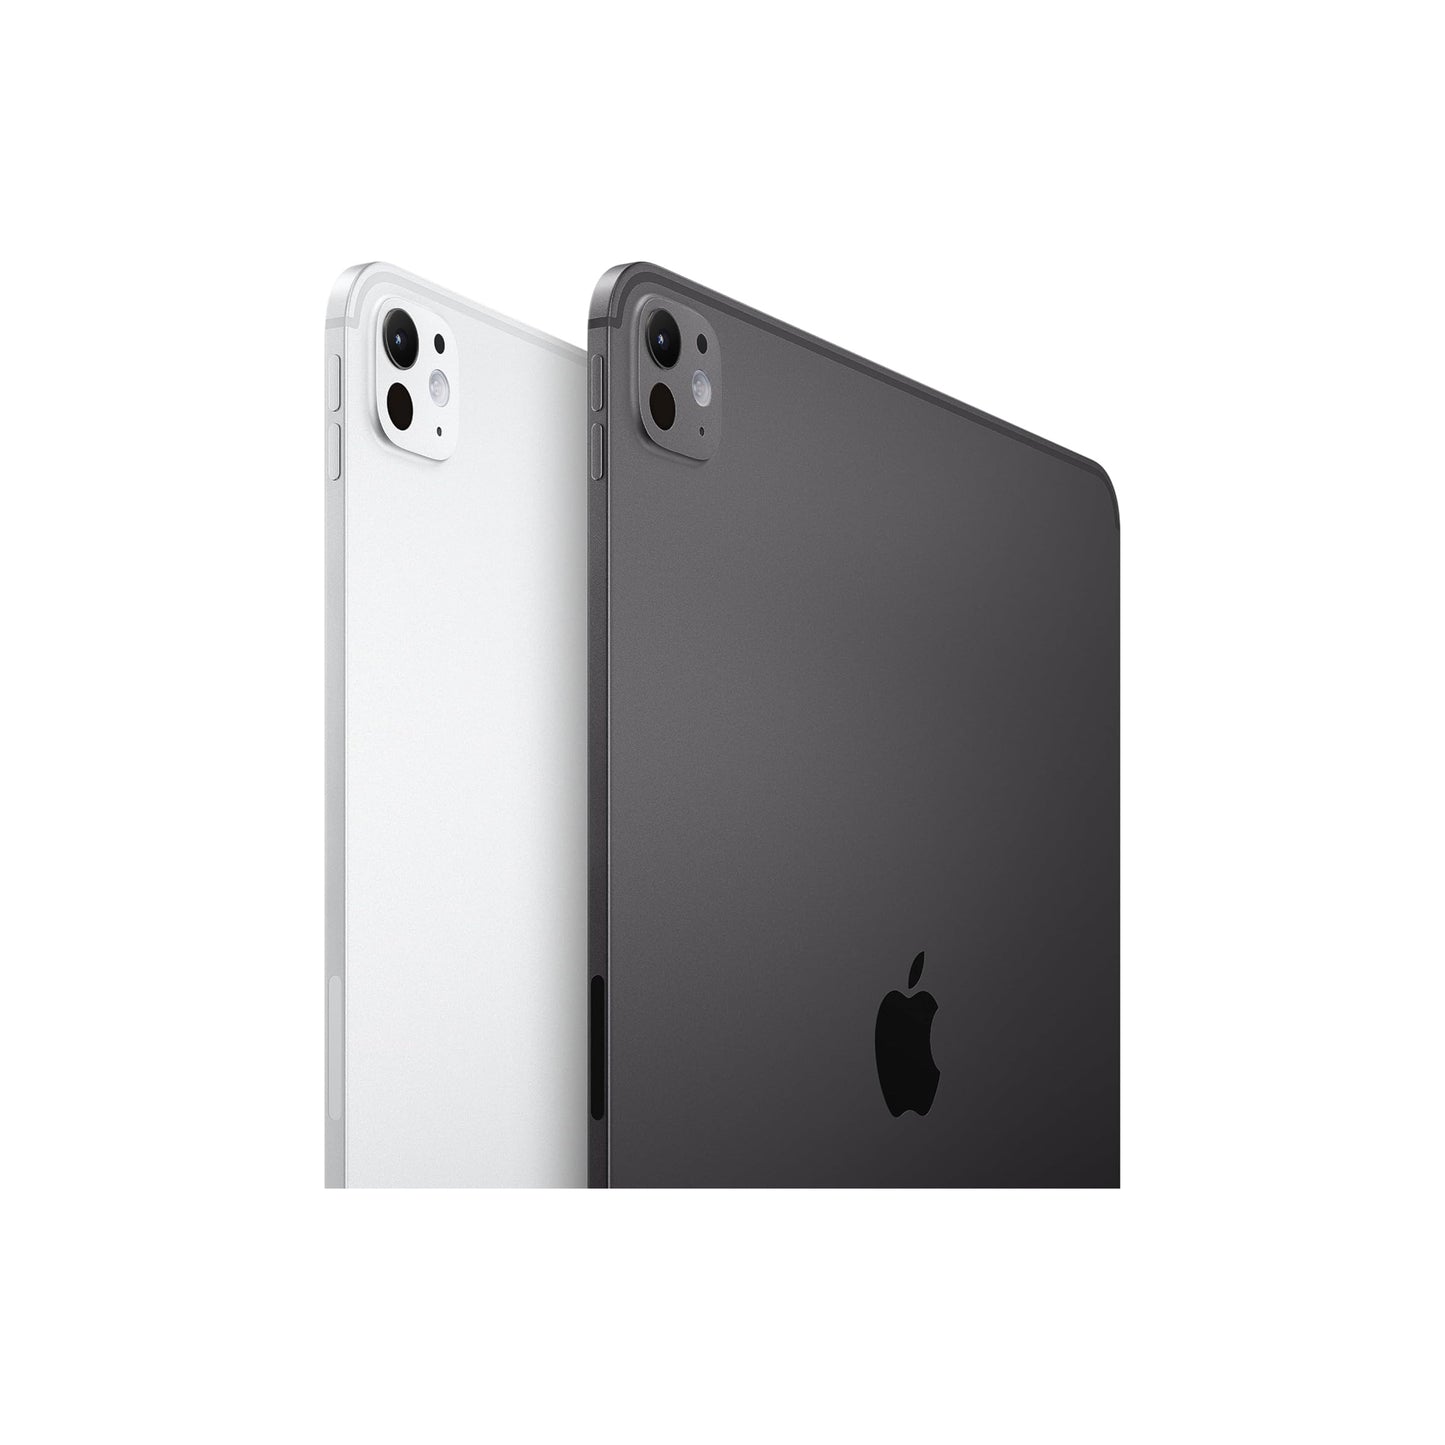 Apple iPad Pro 11-Inch (M4): Ultra Retina XDR Display, 512GB, Landscape 12MP Front Camera/12MP Back Camera, LiDAR Scanner, Wi-Fi 6E + 5G Cellular with eSIM, All-Day Battery Life — Space Black